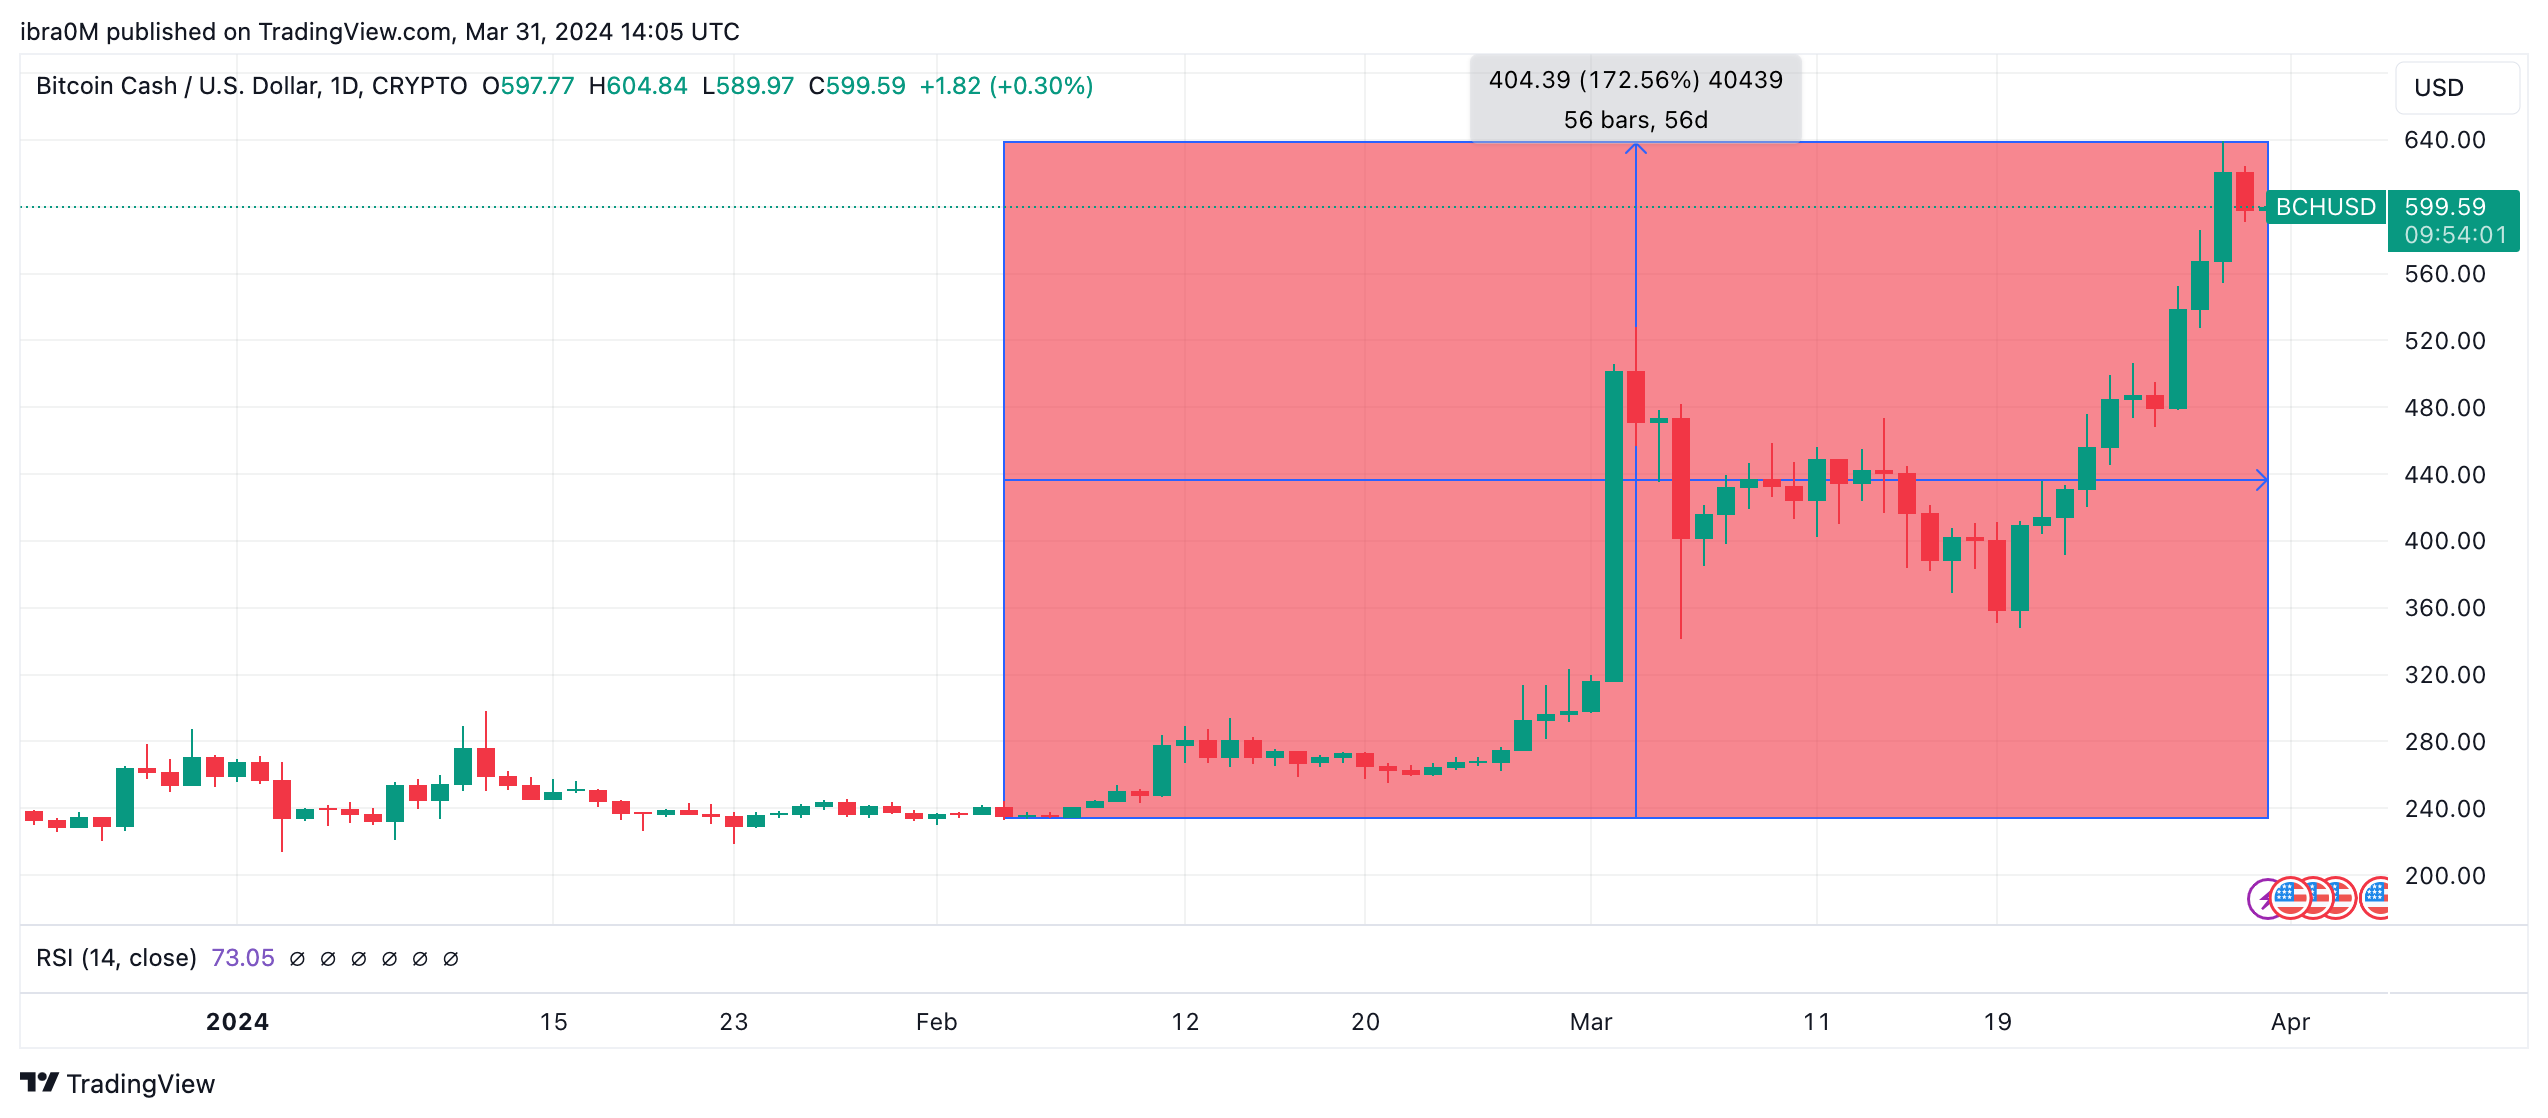 Bitcoin Cash (BCH) price action since Feb 4 | Source: TradingView